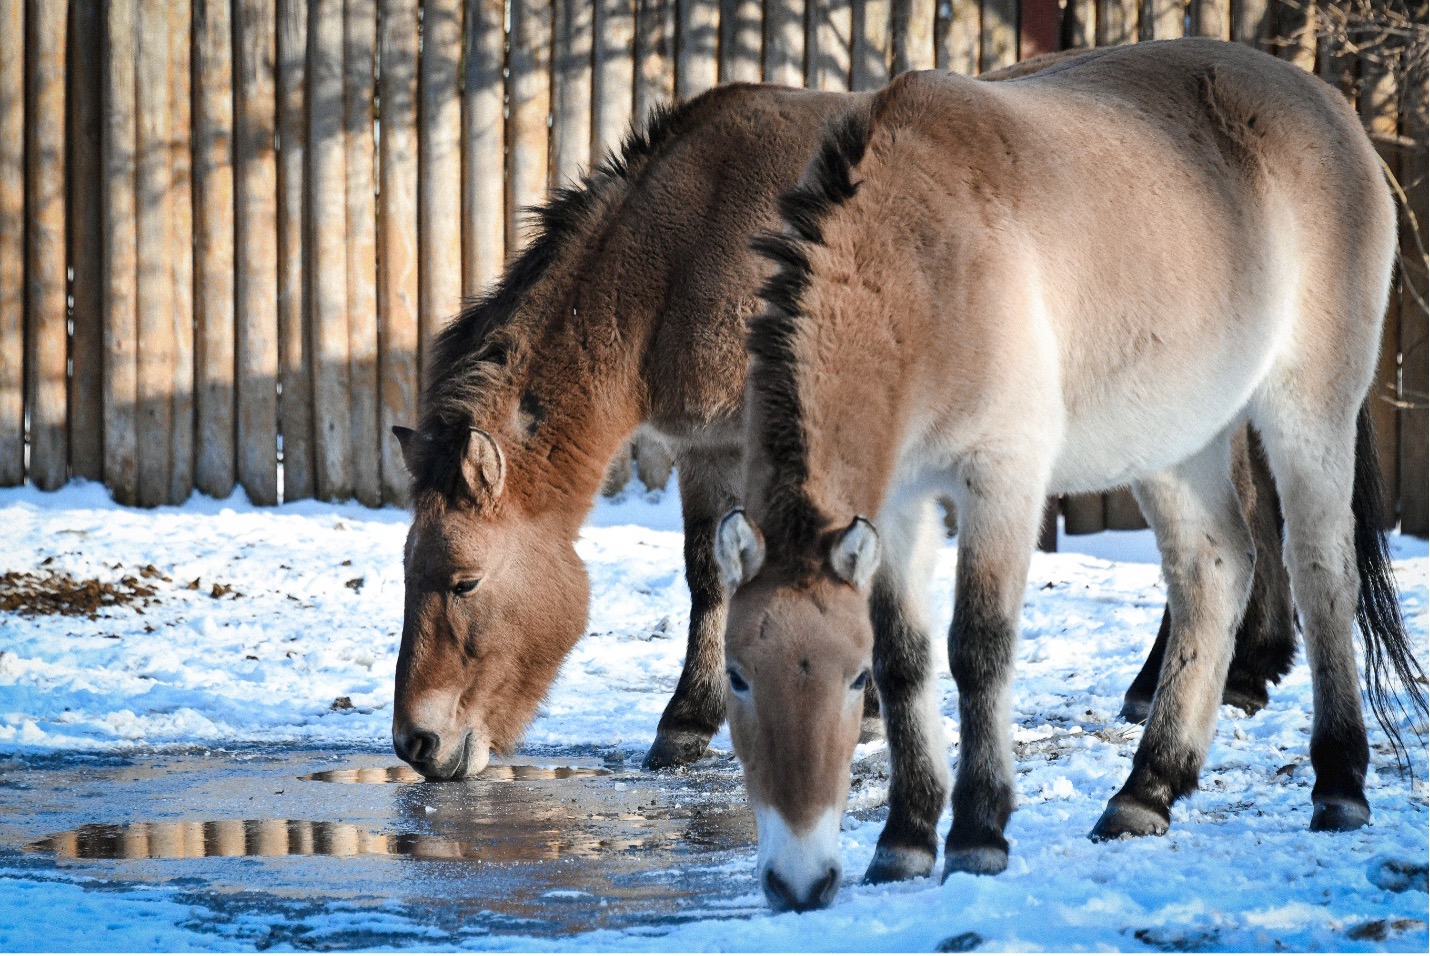 Two Przewalski’s Horses break ice to drink water on a cold winter day at the Kyiv City Zoo. The facility is open for visitors despite Russian missile raids and blackouts sometimes hitting the Ukrainian capital. Dec. 10 photo by Stefan Korshak